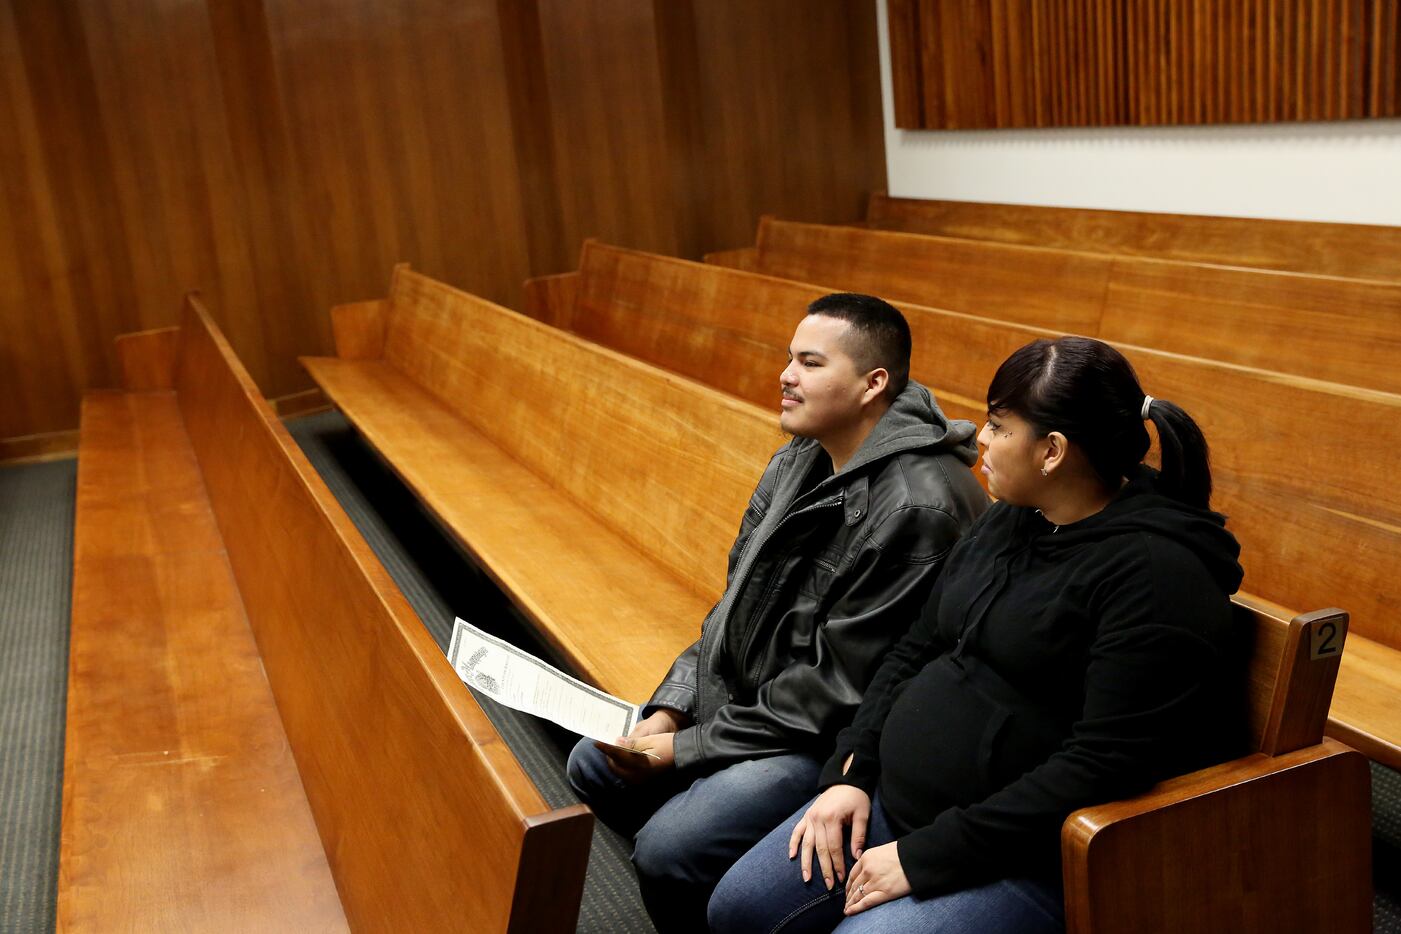 Gonzalo Ramirez and Lizette Torres, both of Dallas, wait to get married in the court room of...